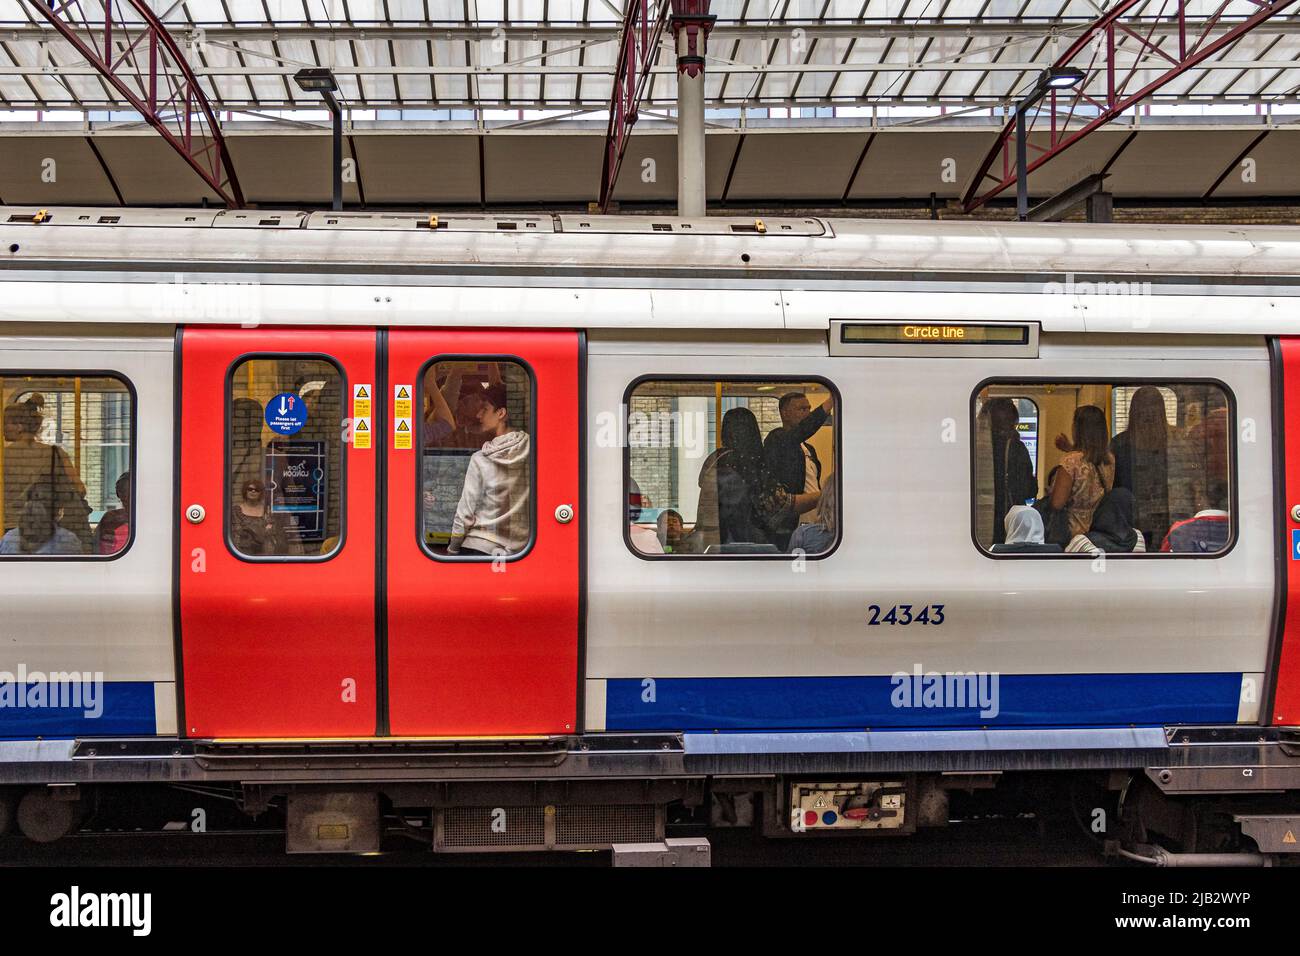 People on board a Circle line train at Farringdon Station, London EC1 Stock Photo